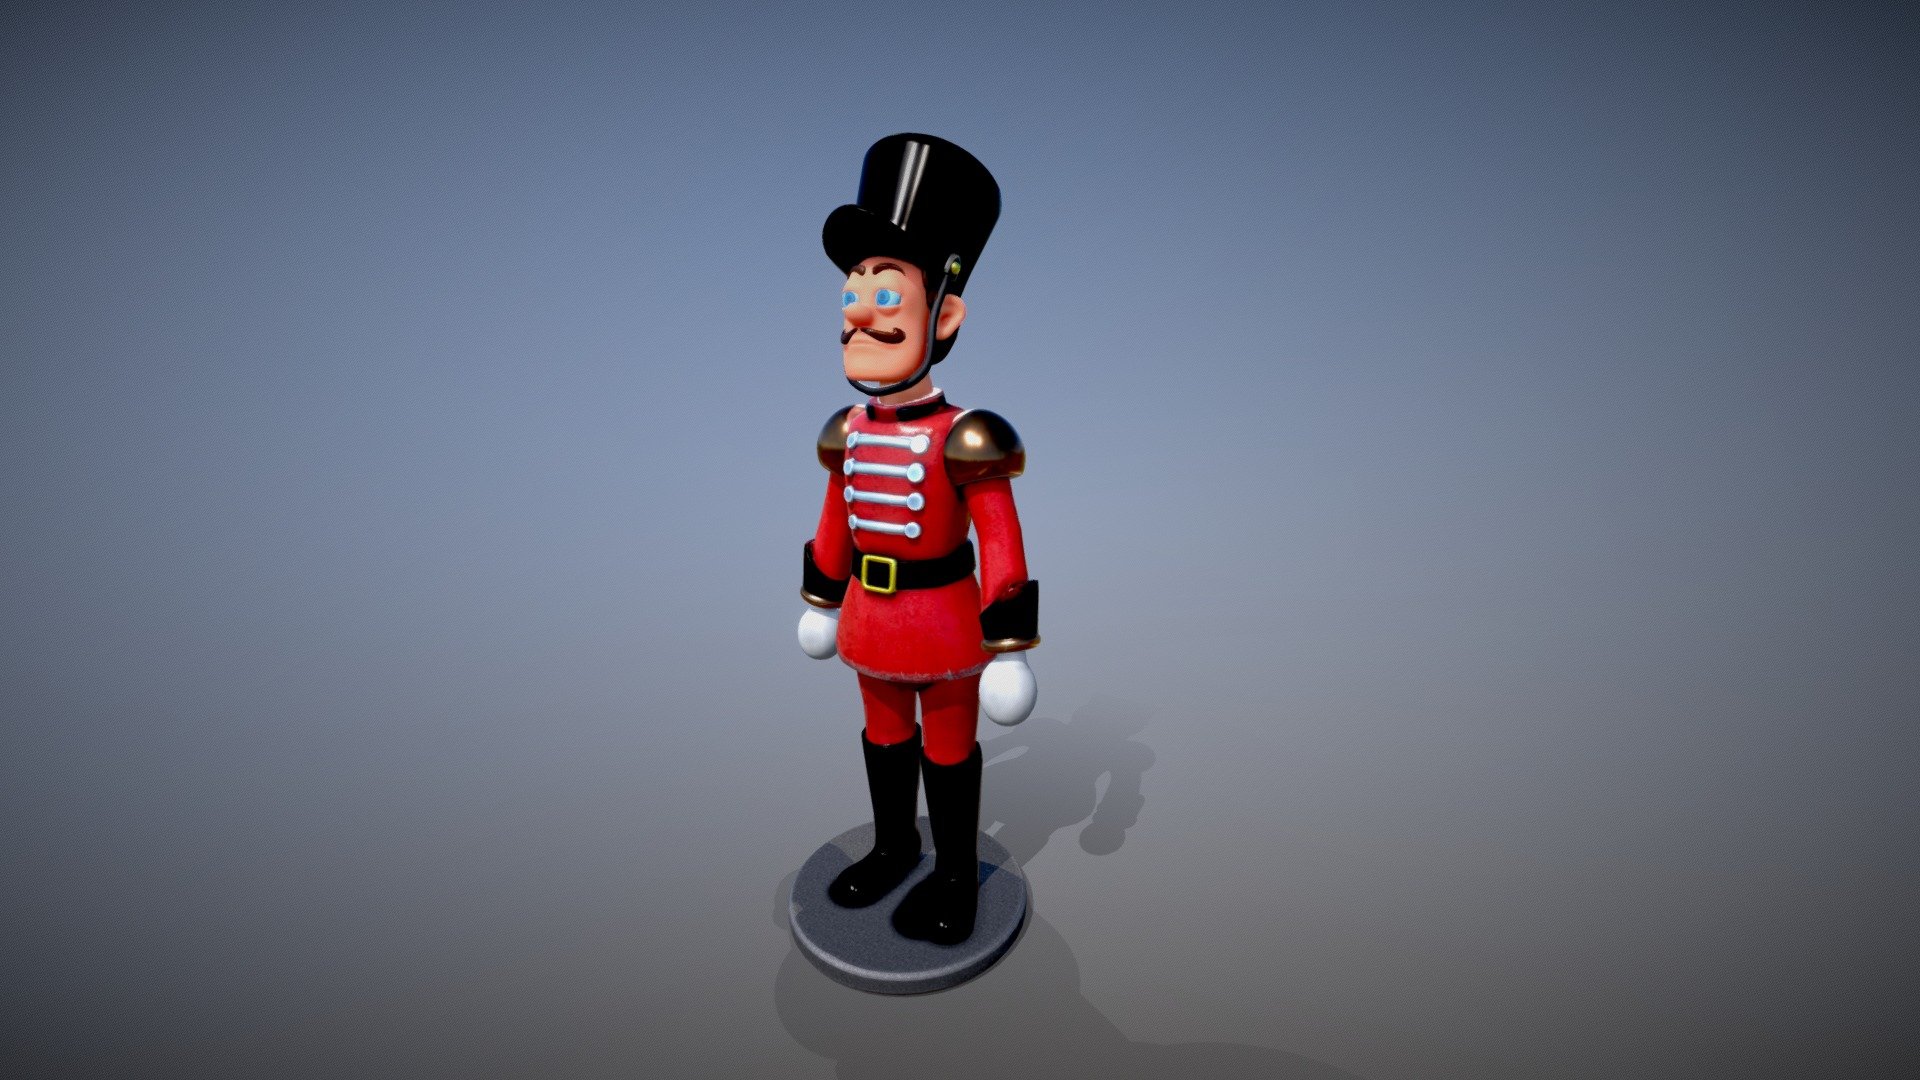 Toy Soldier commissioned for slot game Mr Wonga's Toy Emporium. The 3D model was put together and retopologised in 3DCoat.  It was used as the basis for 2D animations using Spine.  Having a 3D model was deemed the best starting point with the character being available for further use in rendered scenes or promotional materials where needed 3d model